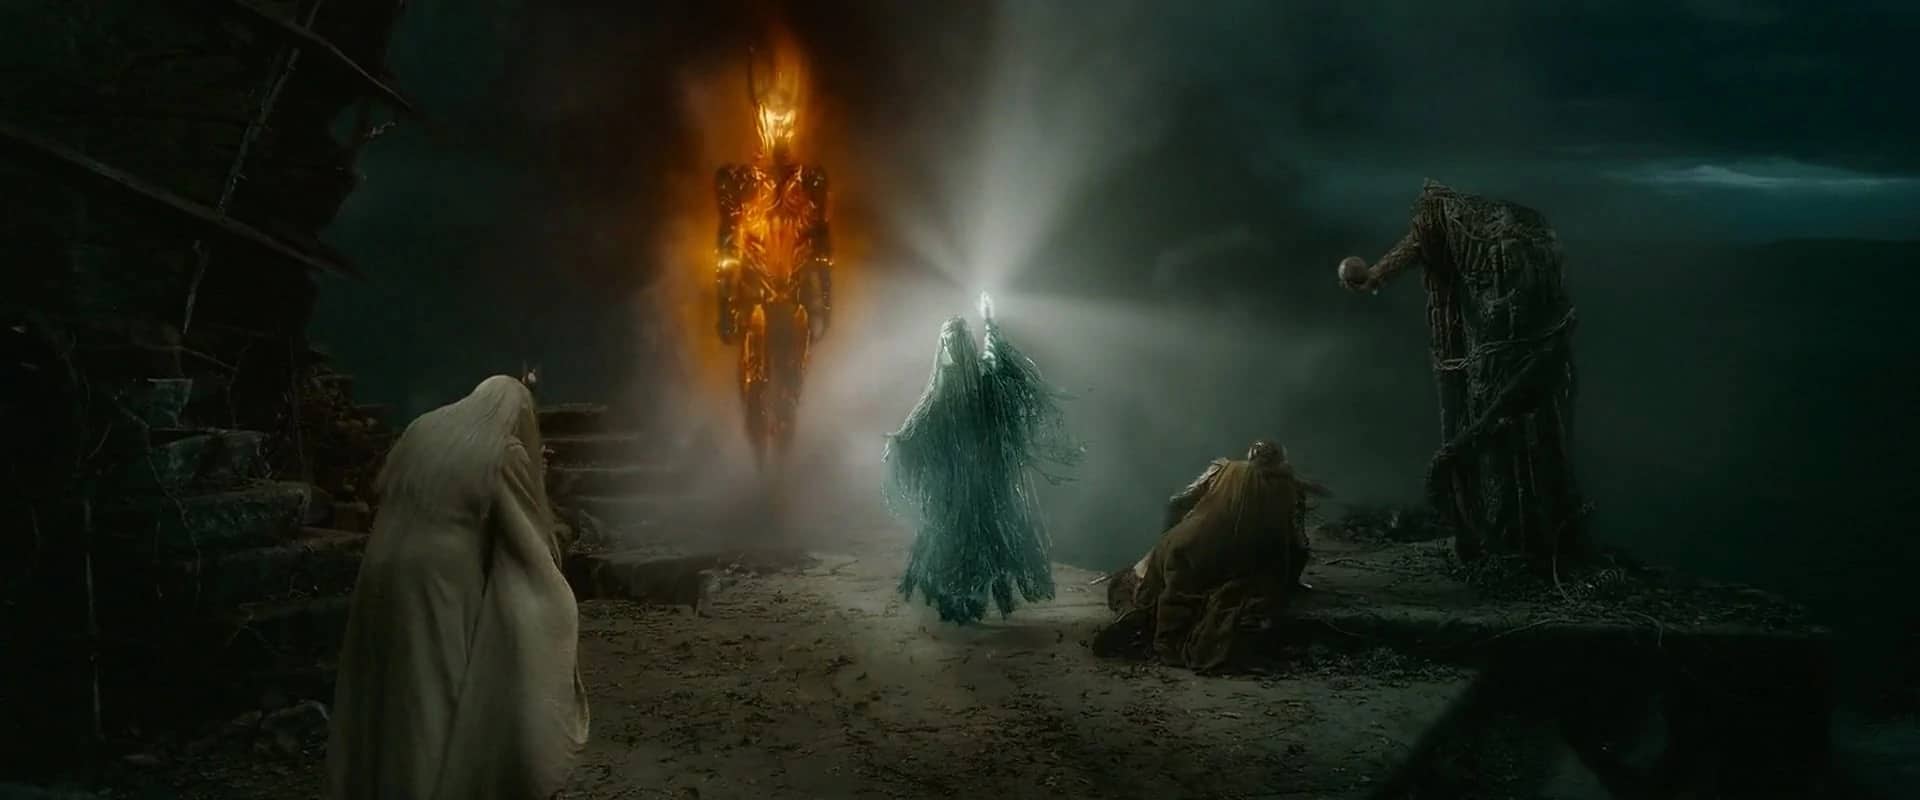 Galadriel and Sauron